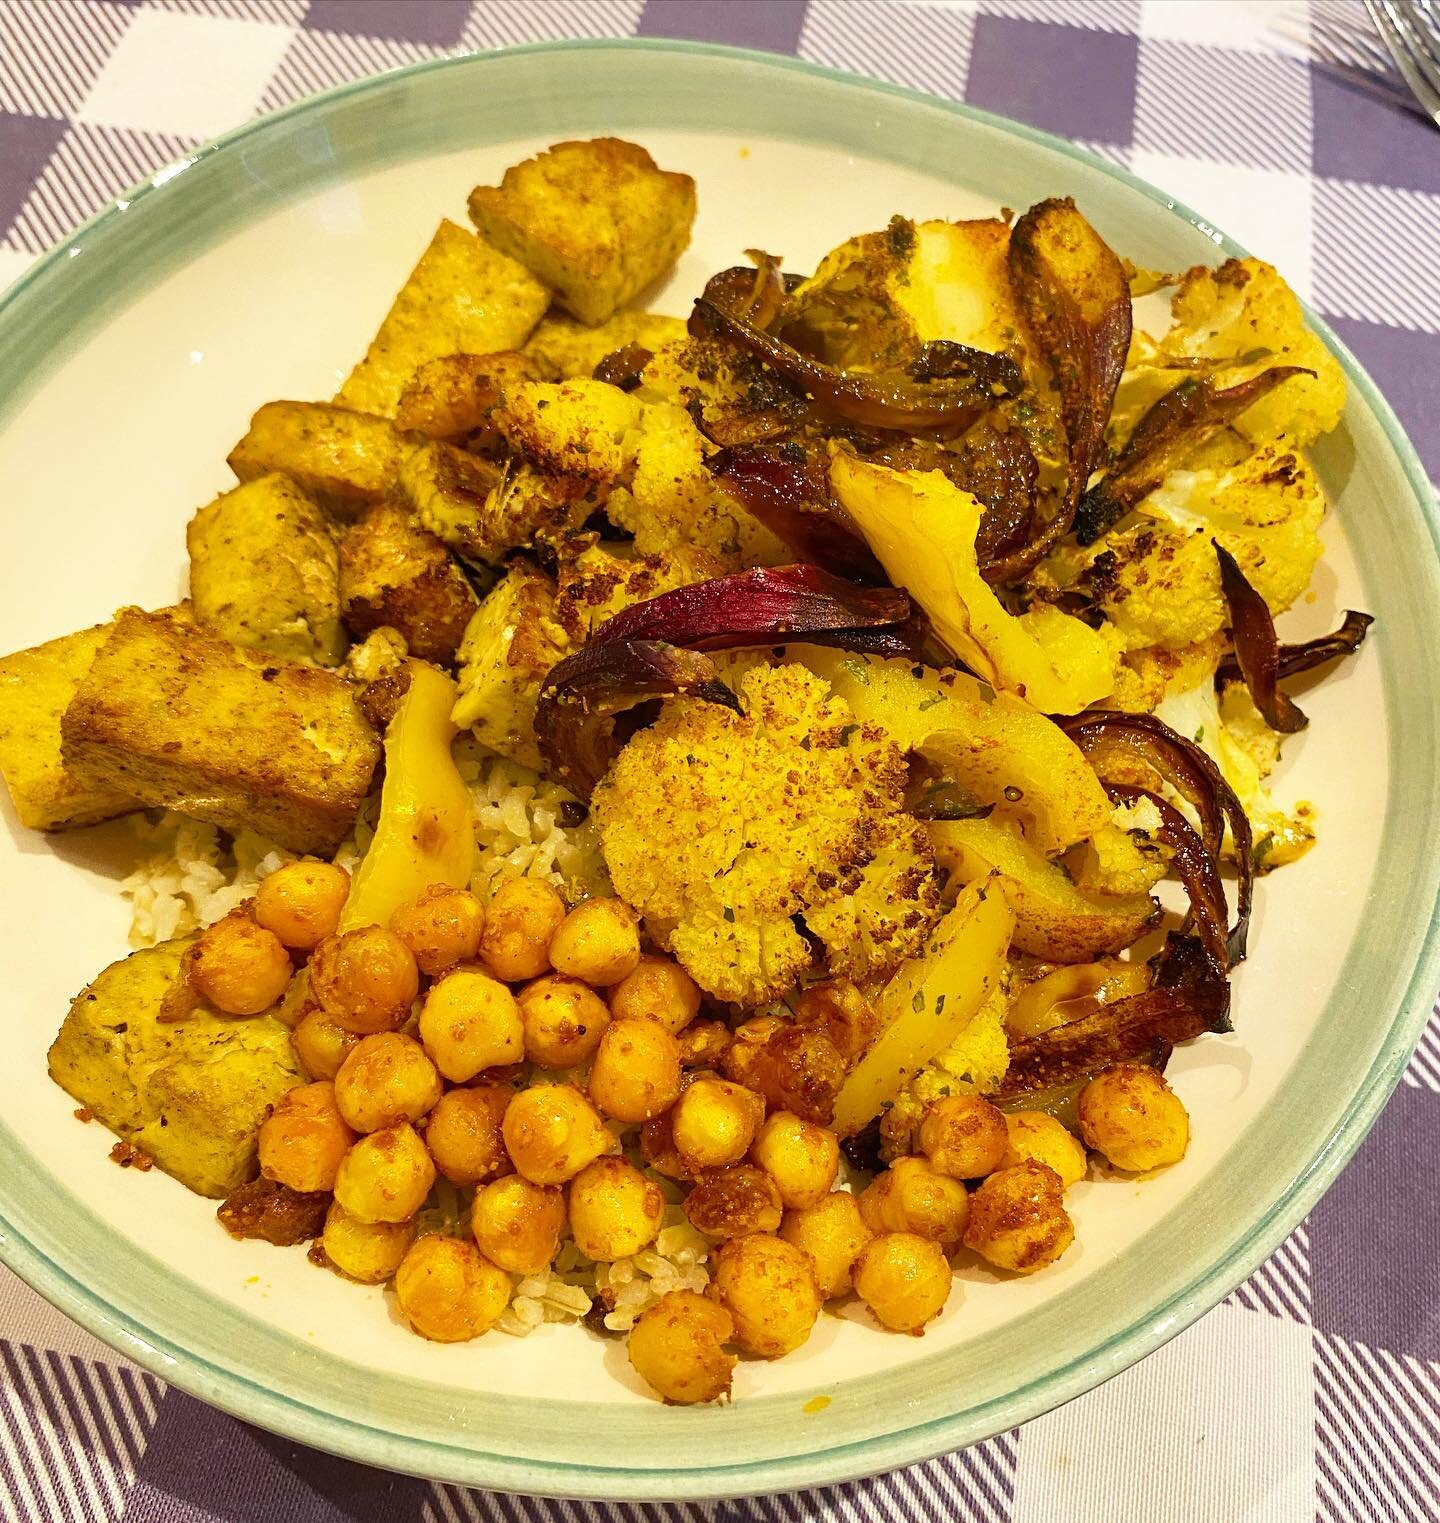 Nutrient packed meal; brown rice (complex carb), chickpeas (fibre, protein), smoked tofu (plant protein), roasted cauliflower with paprika and turmeric (cruciferous vegetable rich in fibre, beneficial for gut + liver health) and red onion (antioxidan